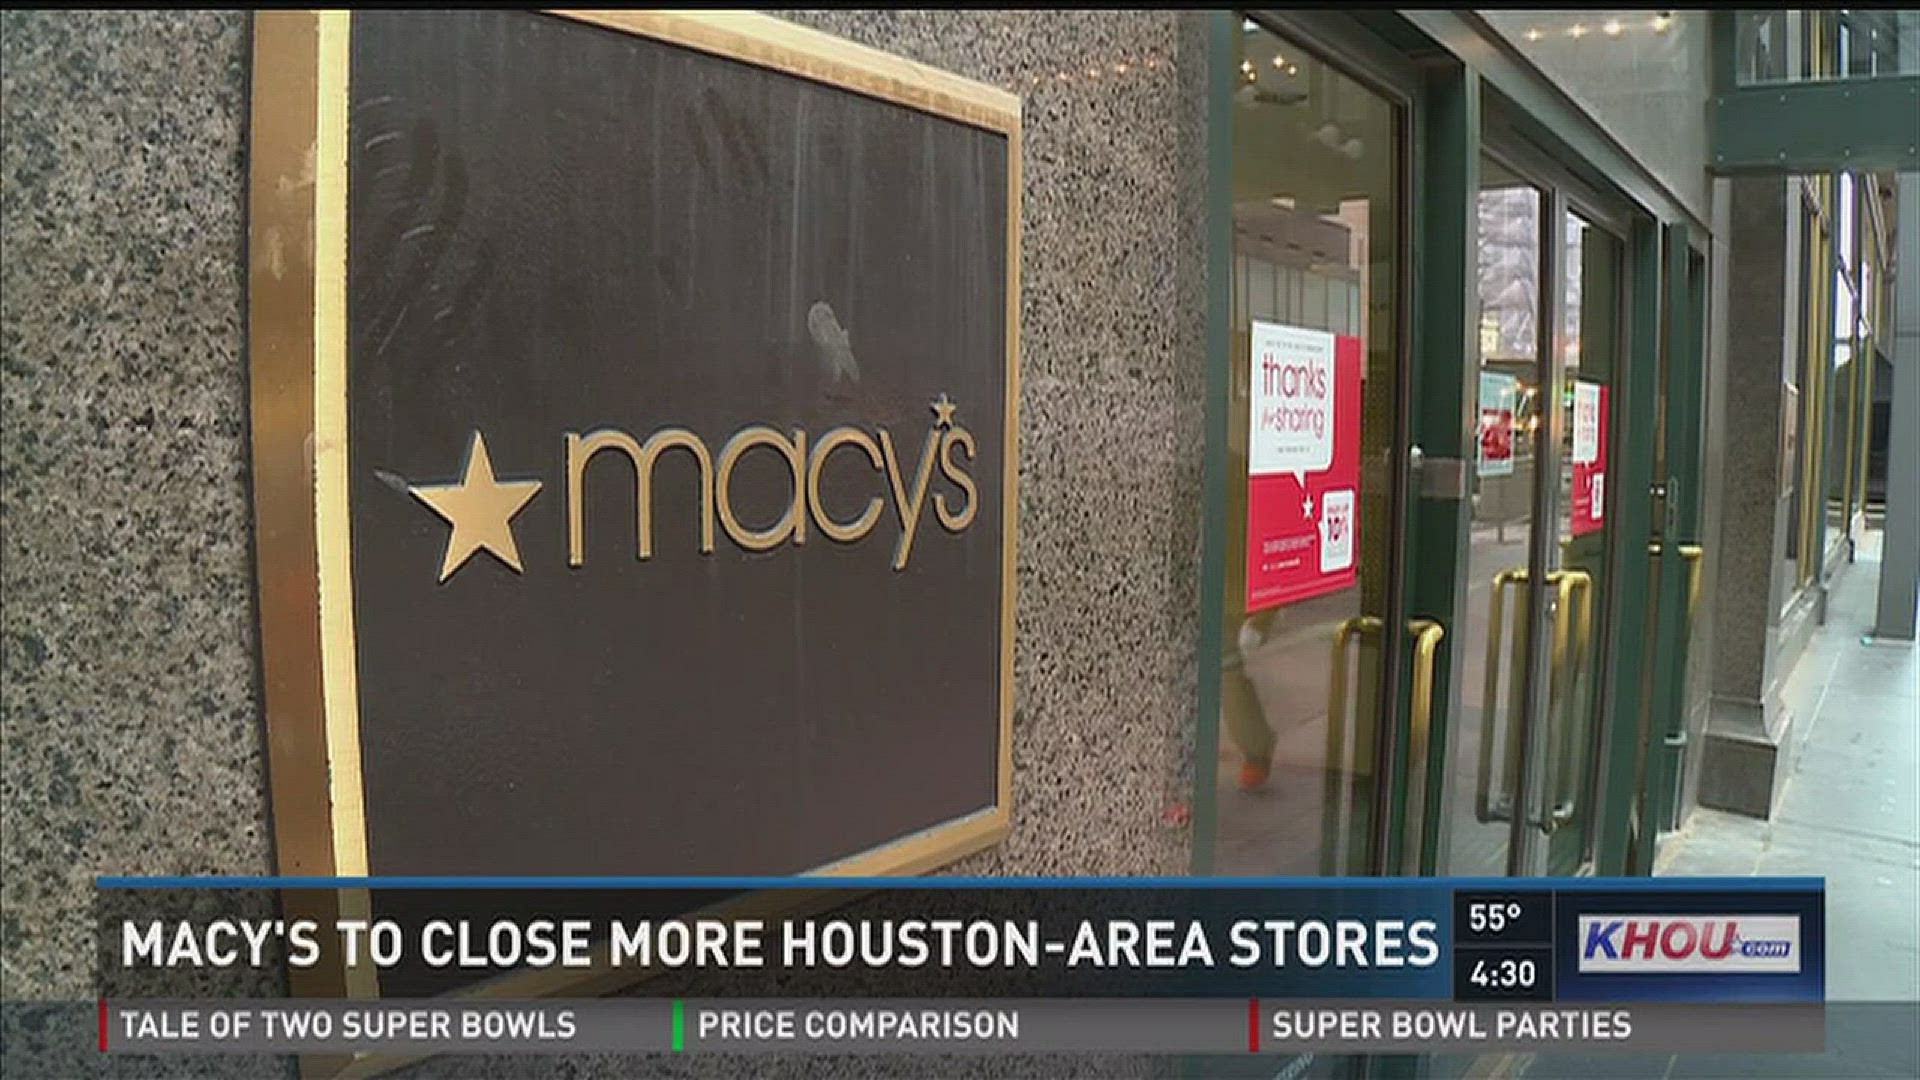 Macy's to close Preakness mall store in Wayne